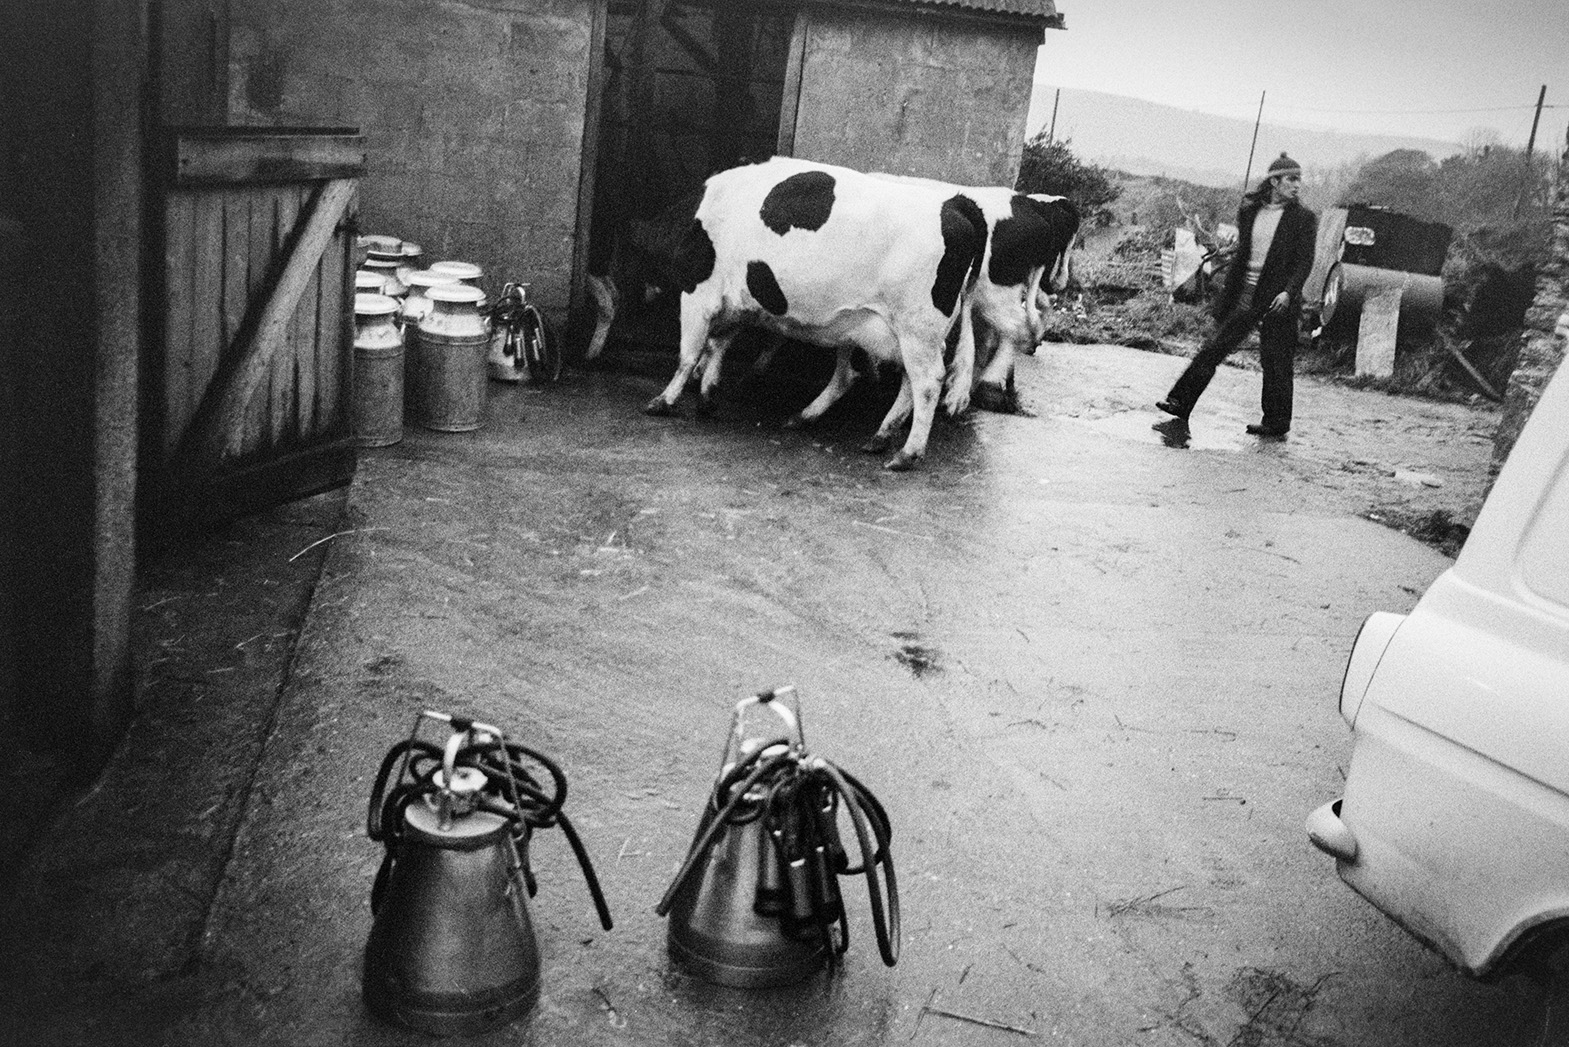 Derek Bright herding cows into a milking parlour to be milked, at Mill Road Farm, Beaford. Milking machine and milk churns can be seen in the farmyard. The farm was also known as Jeffrys.